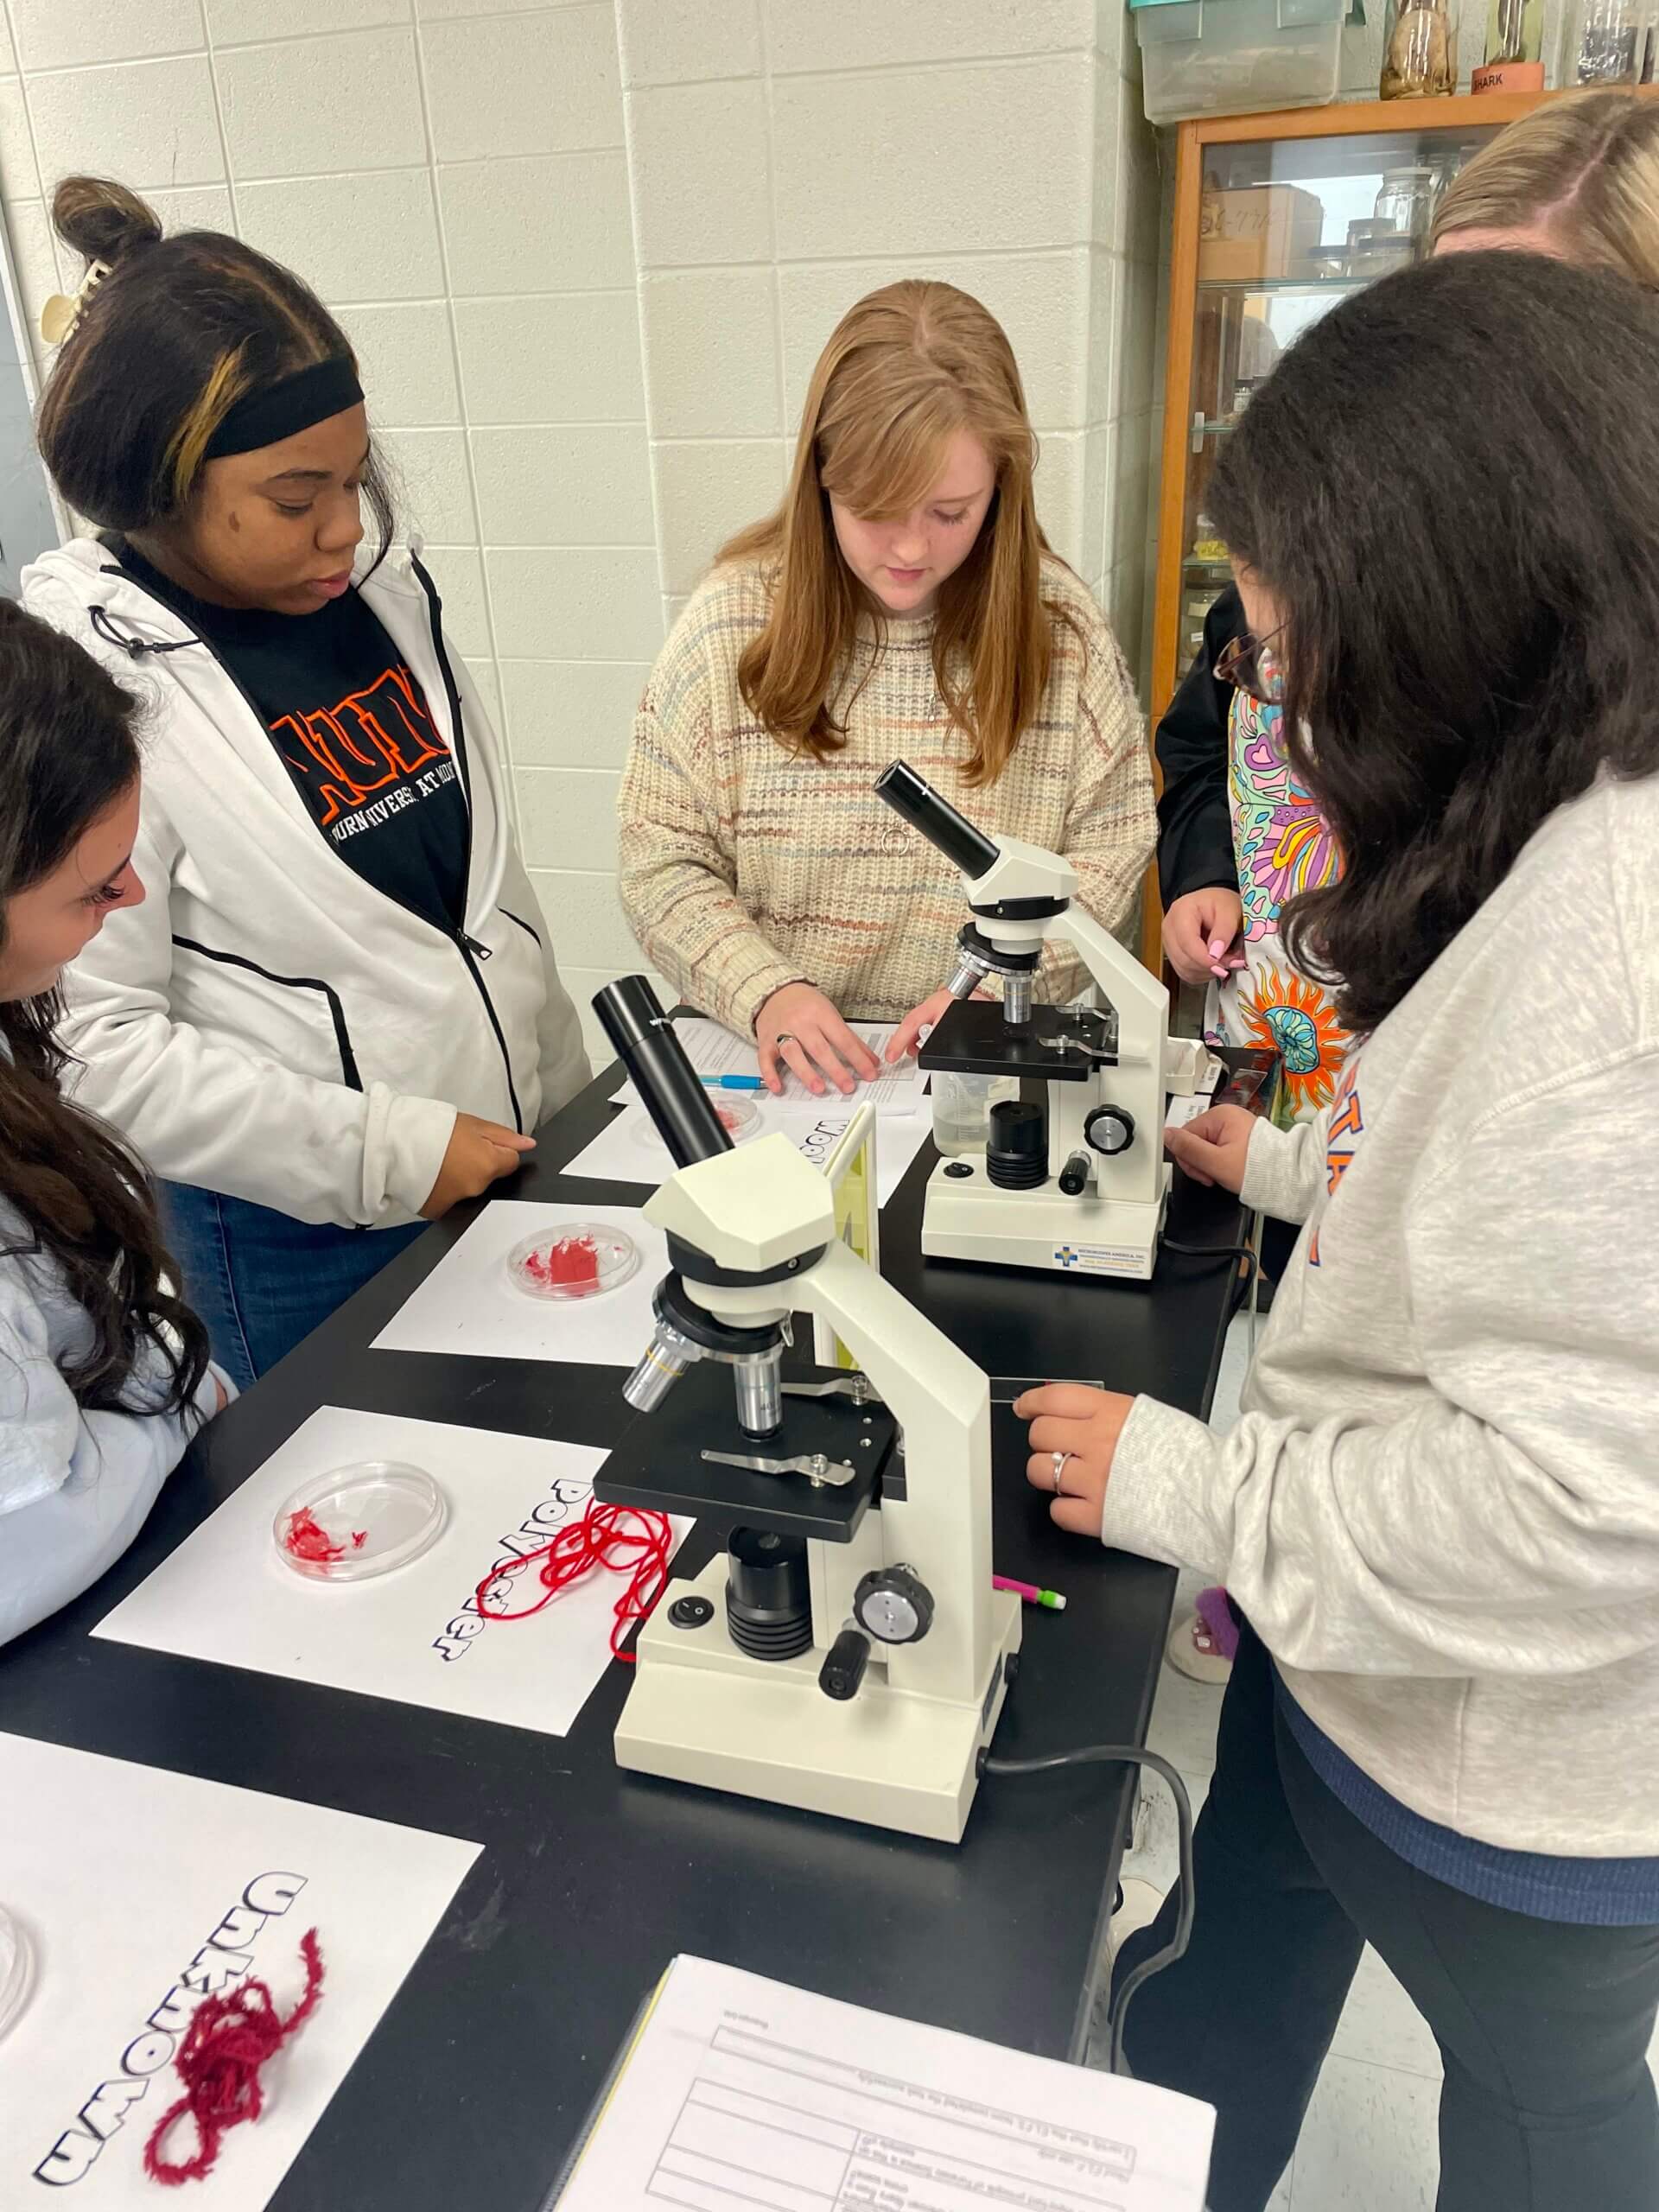 Students engaged in lab